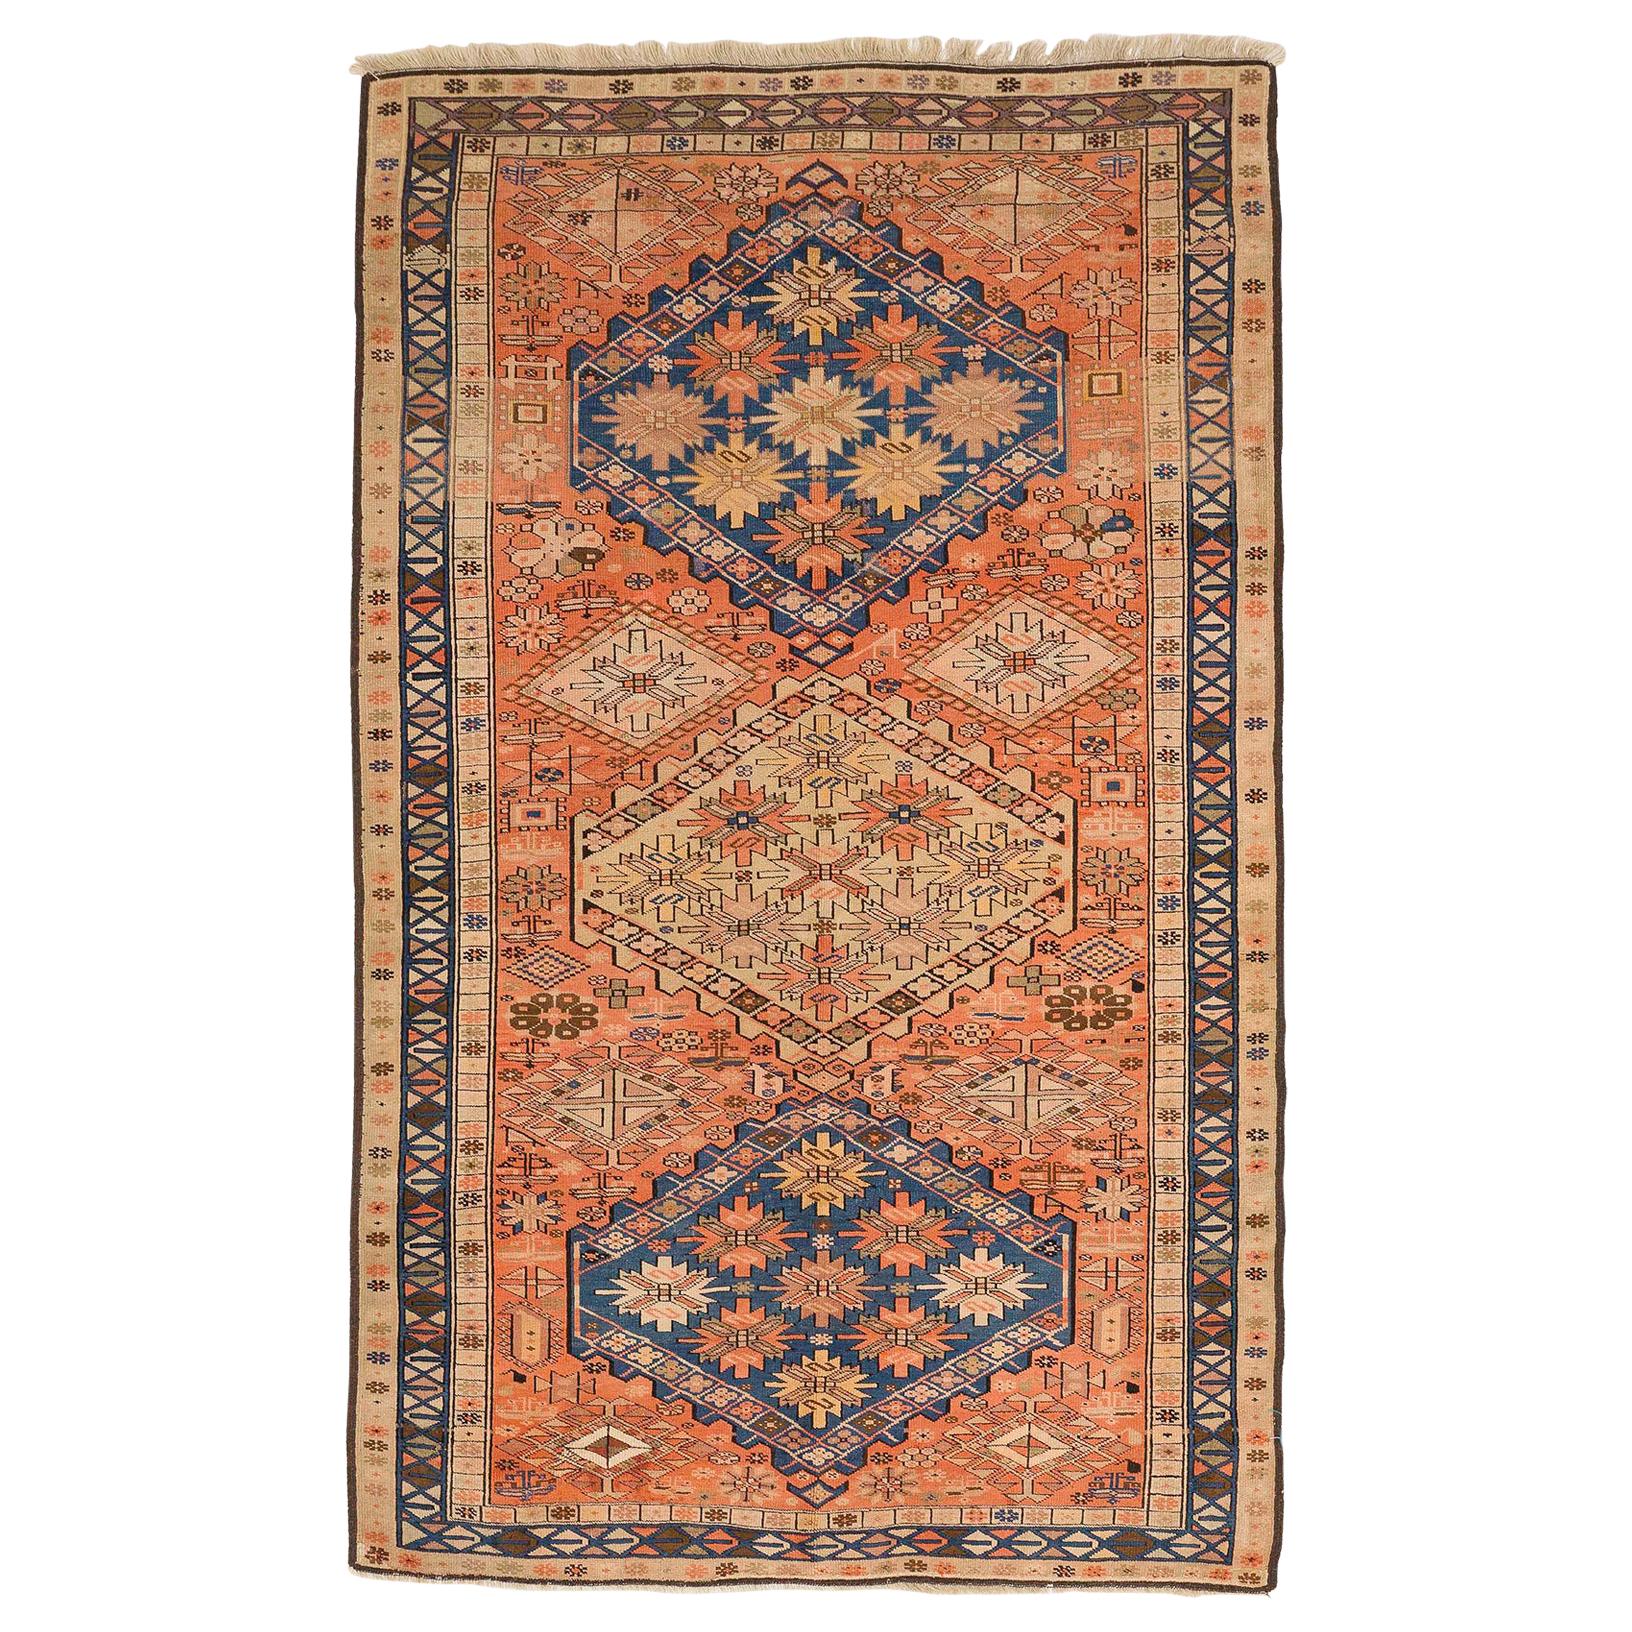 Antique Persian Karajeh Rug with Navy and Beige Floral Medallions